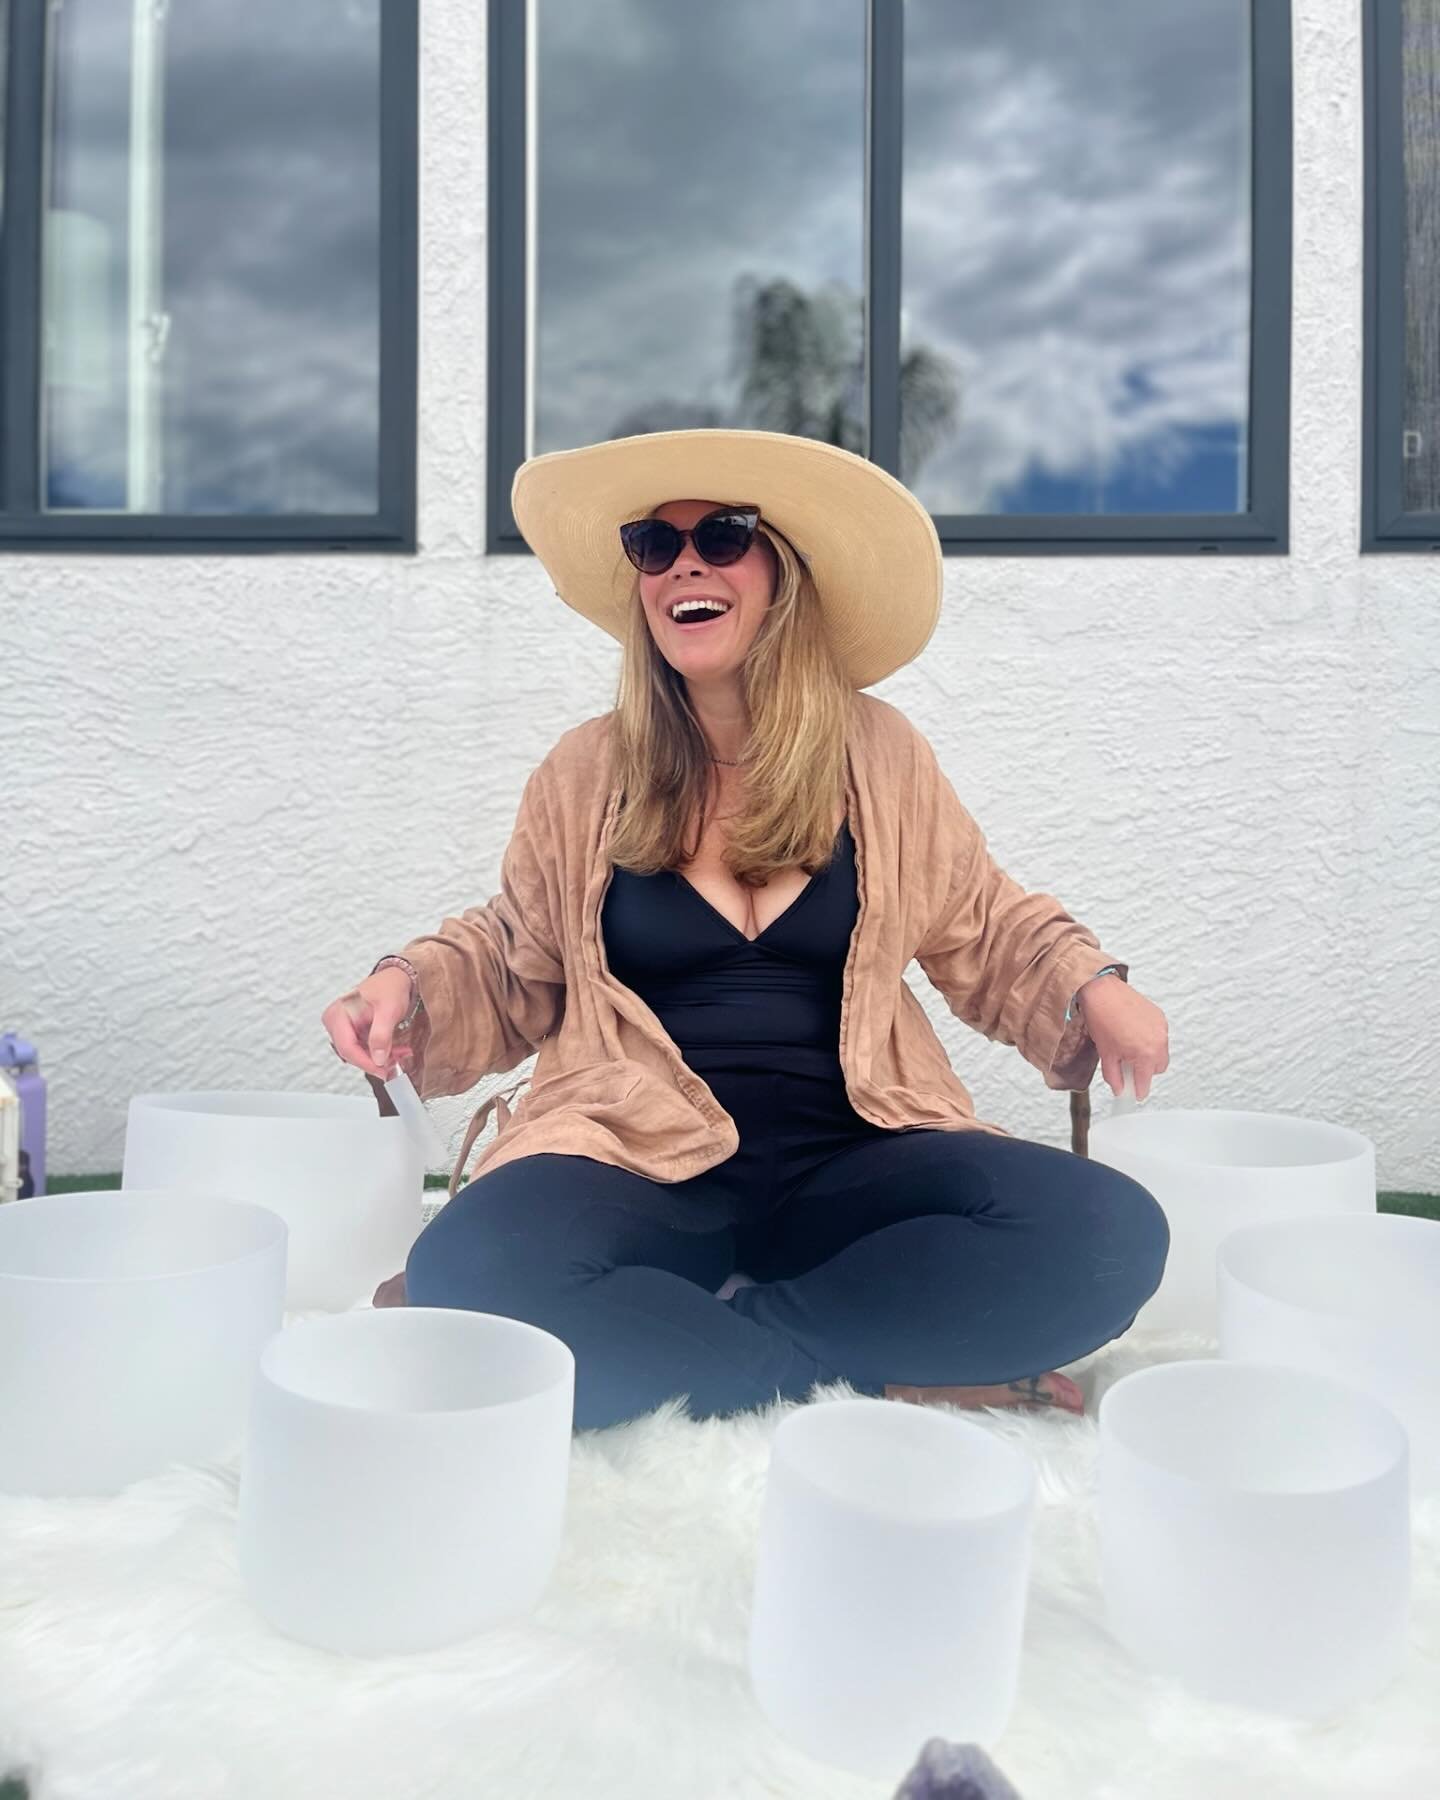 In her most recent @my.leapoffaith podcast episode, our Spring Gateway hostess @gabrielle.ginter shares her gateway experience and the magic behind her Pearl Offering of sound bowl healing. 

The upcoming summer solstice gateway is returning to Gabri